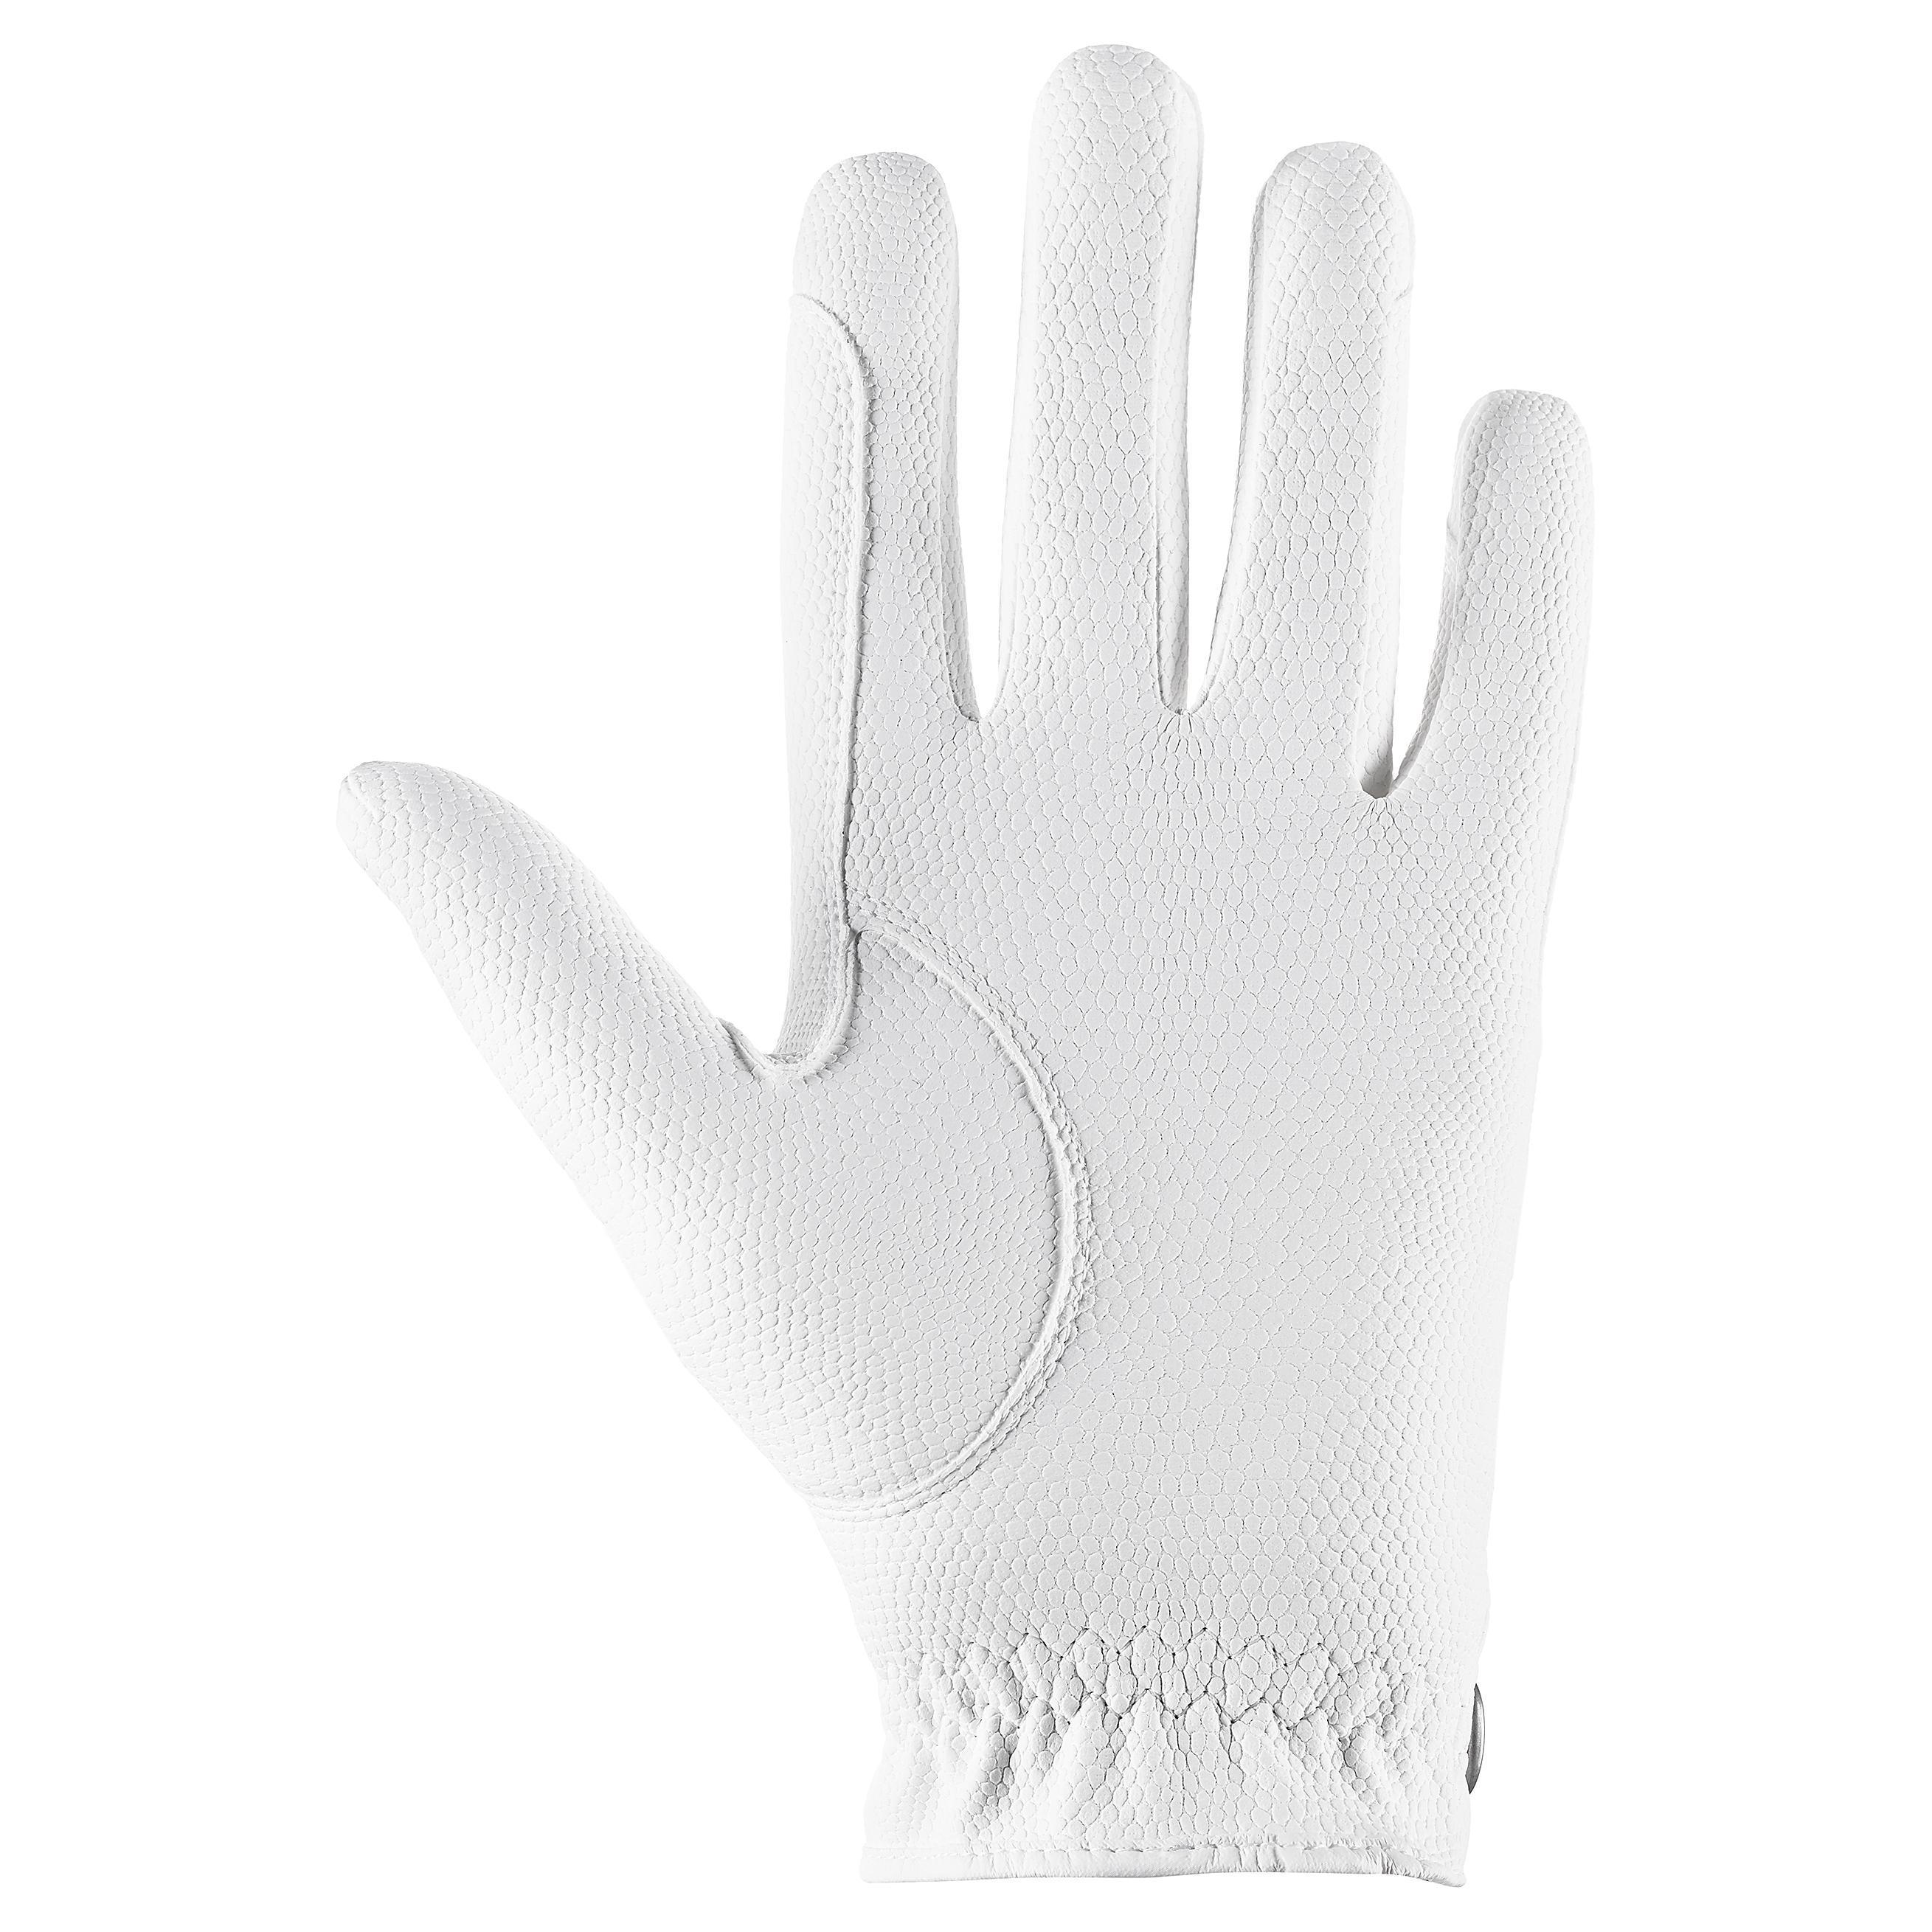 Uvex Unisex – Adult's Sportstyle Riding Gloves